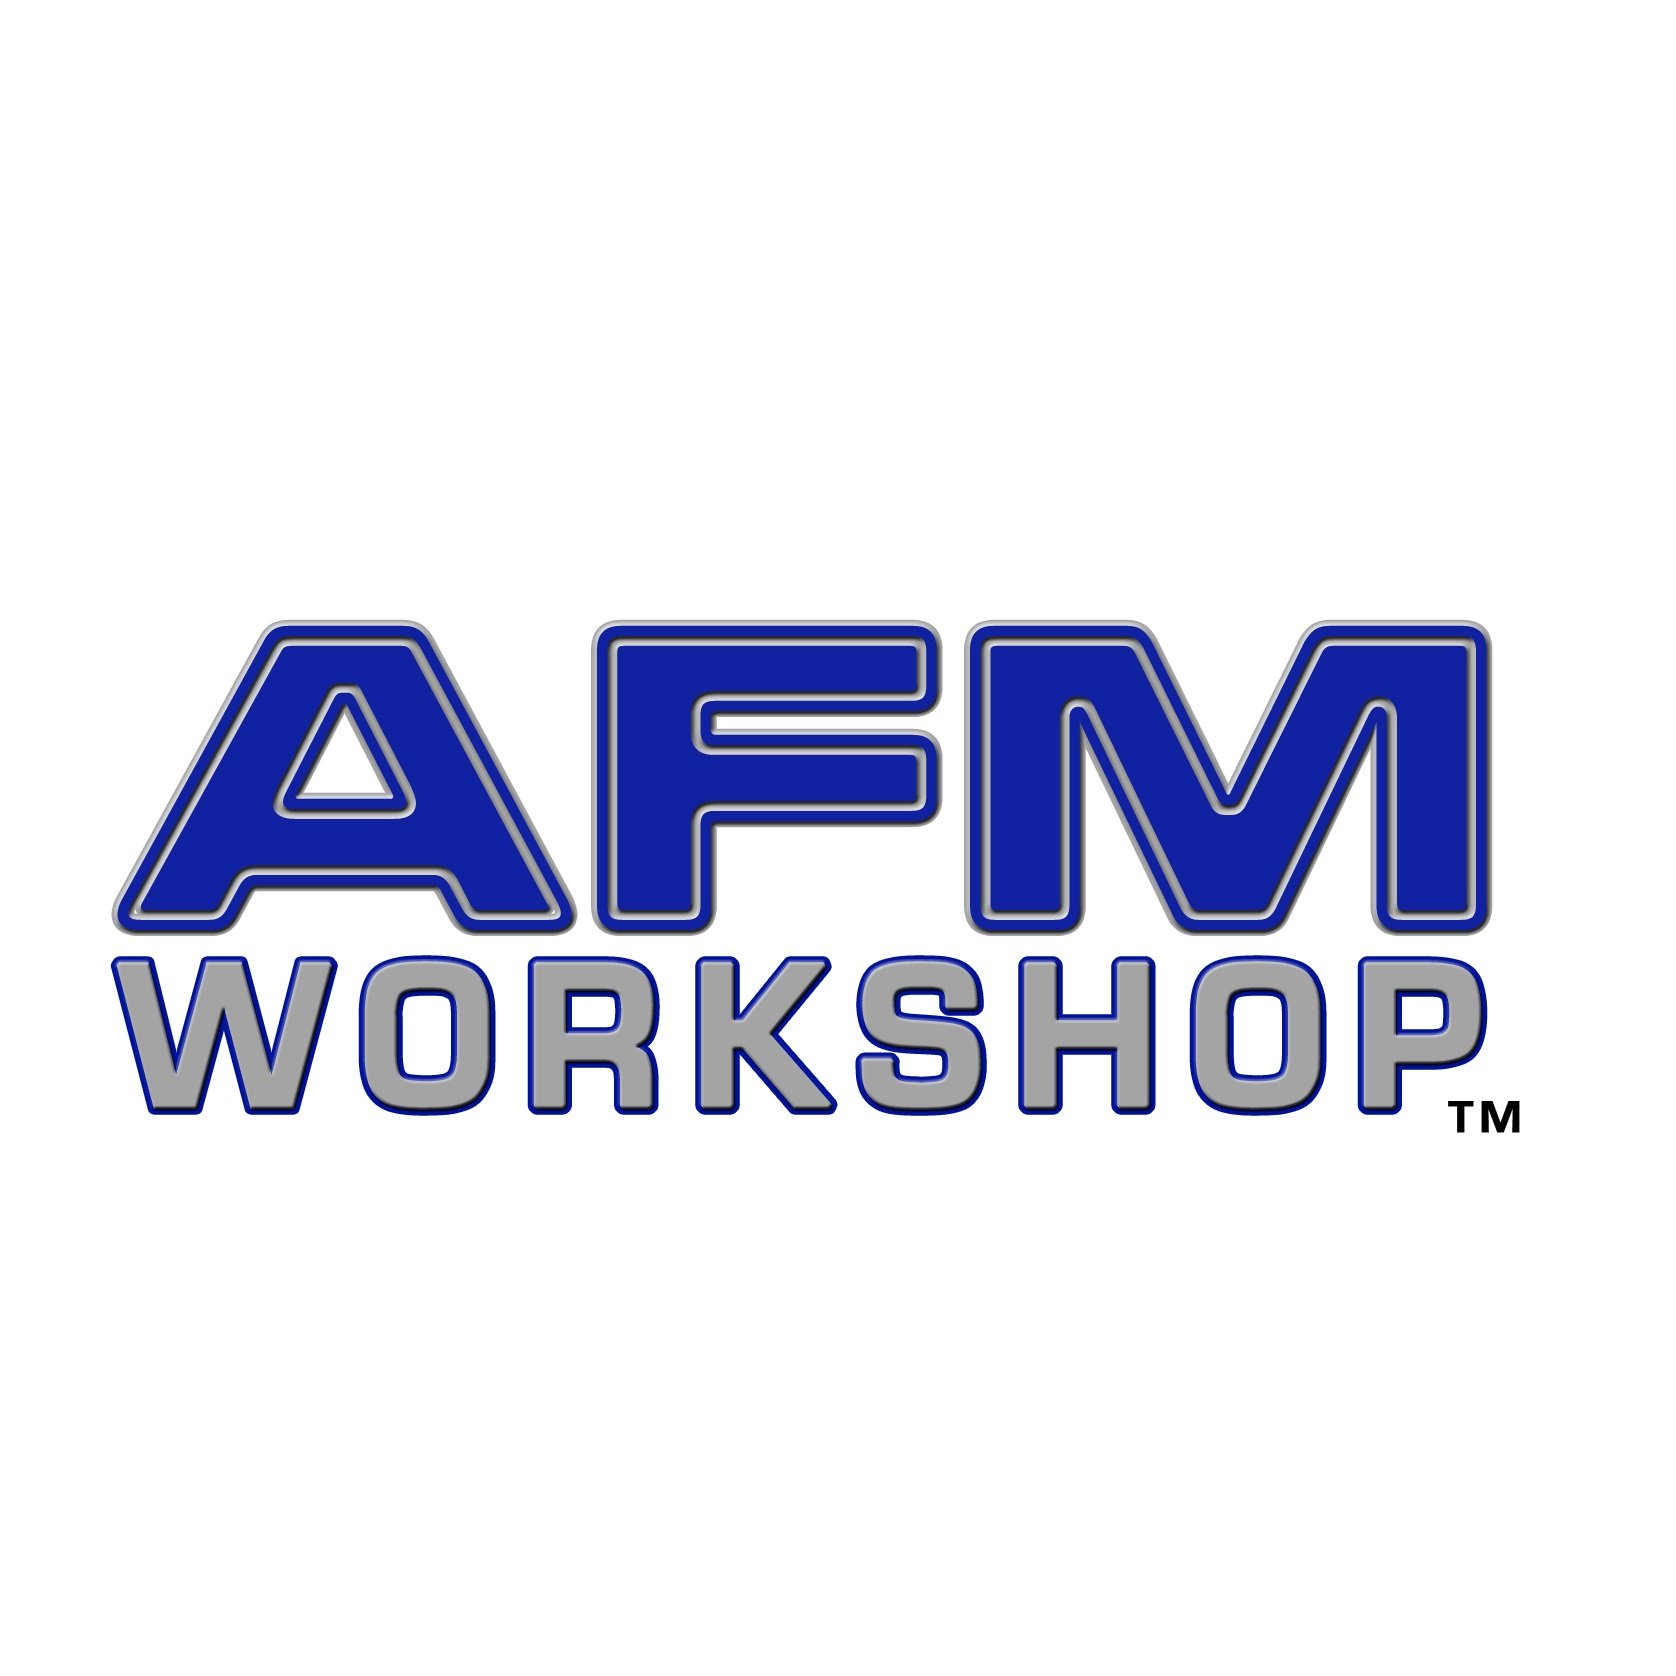 AFMWorkshop designs and manufactures high-performance, low-priced Atomic Force Microscopes. Our AFMs are used in fields of research, industry, and education.